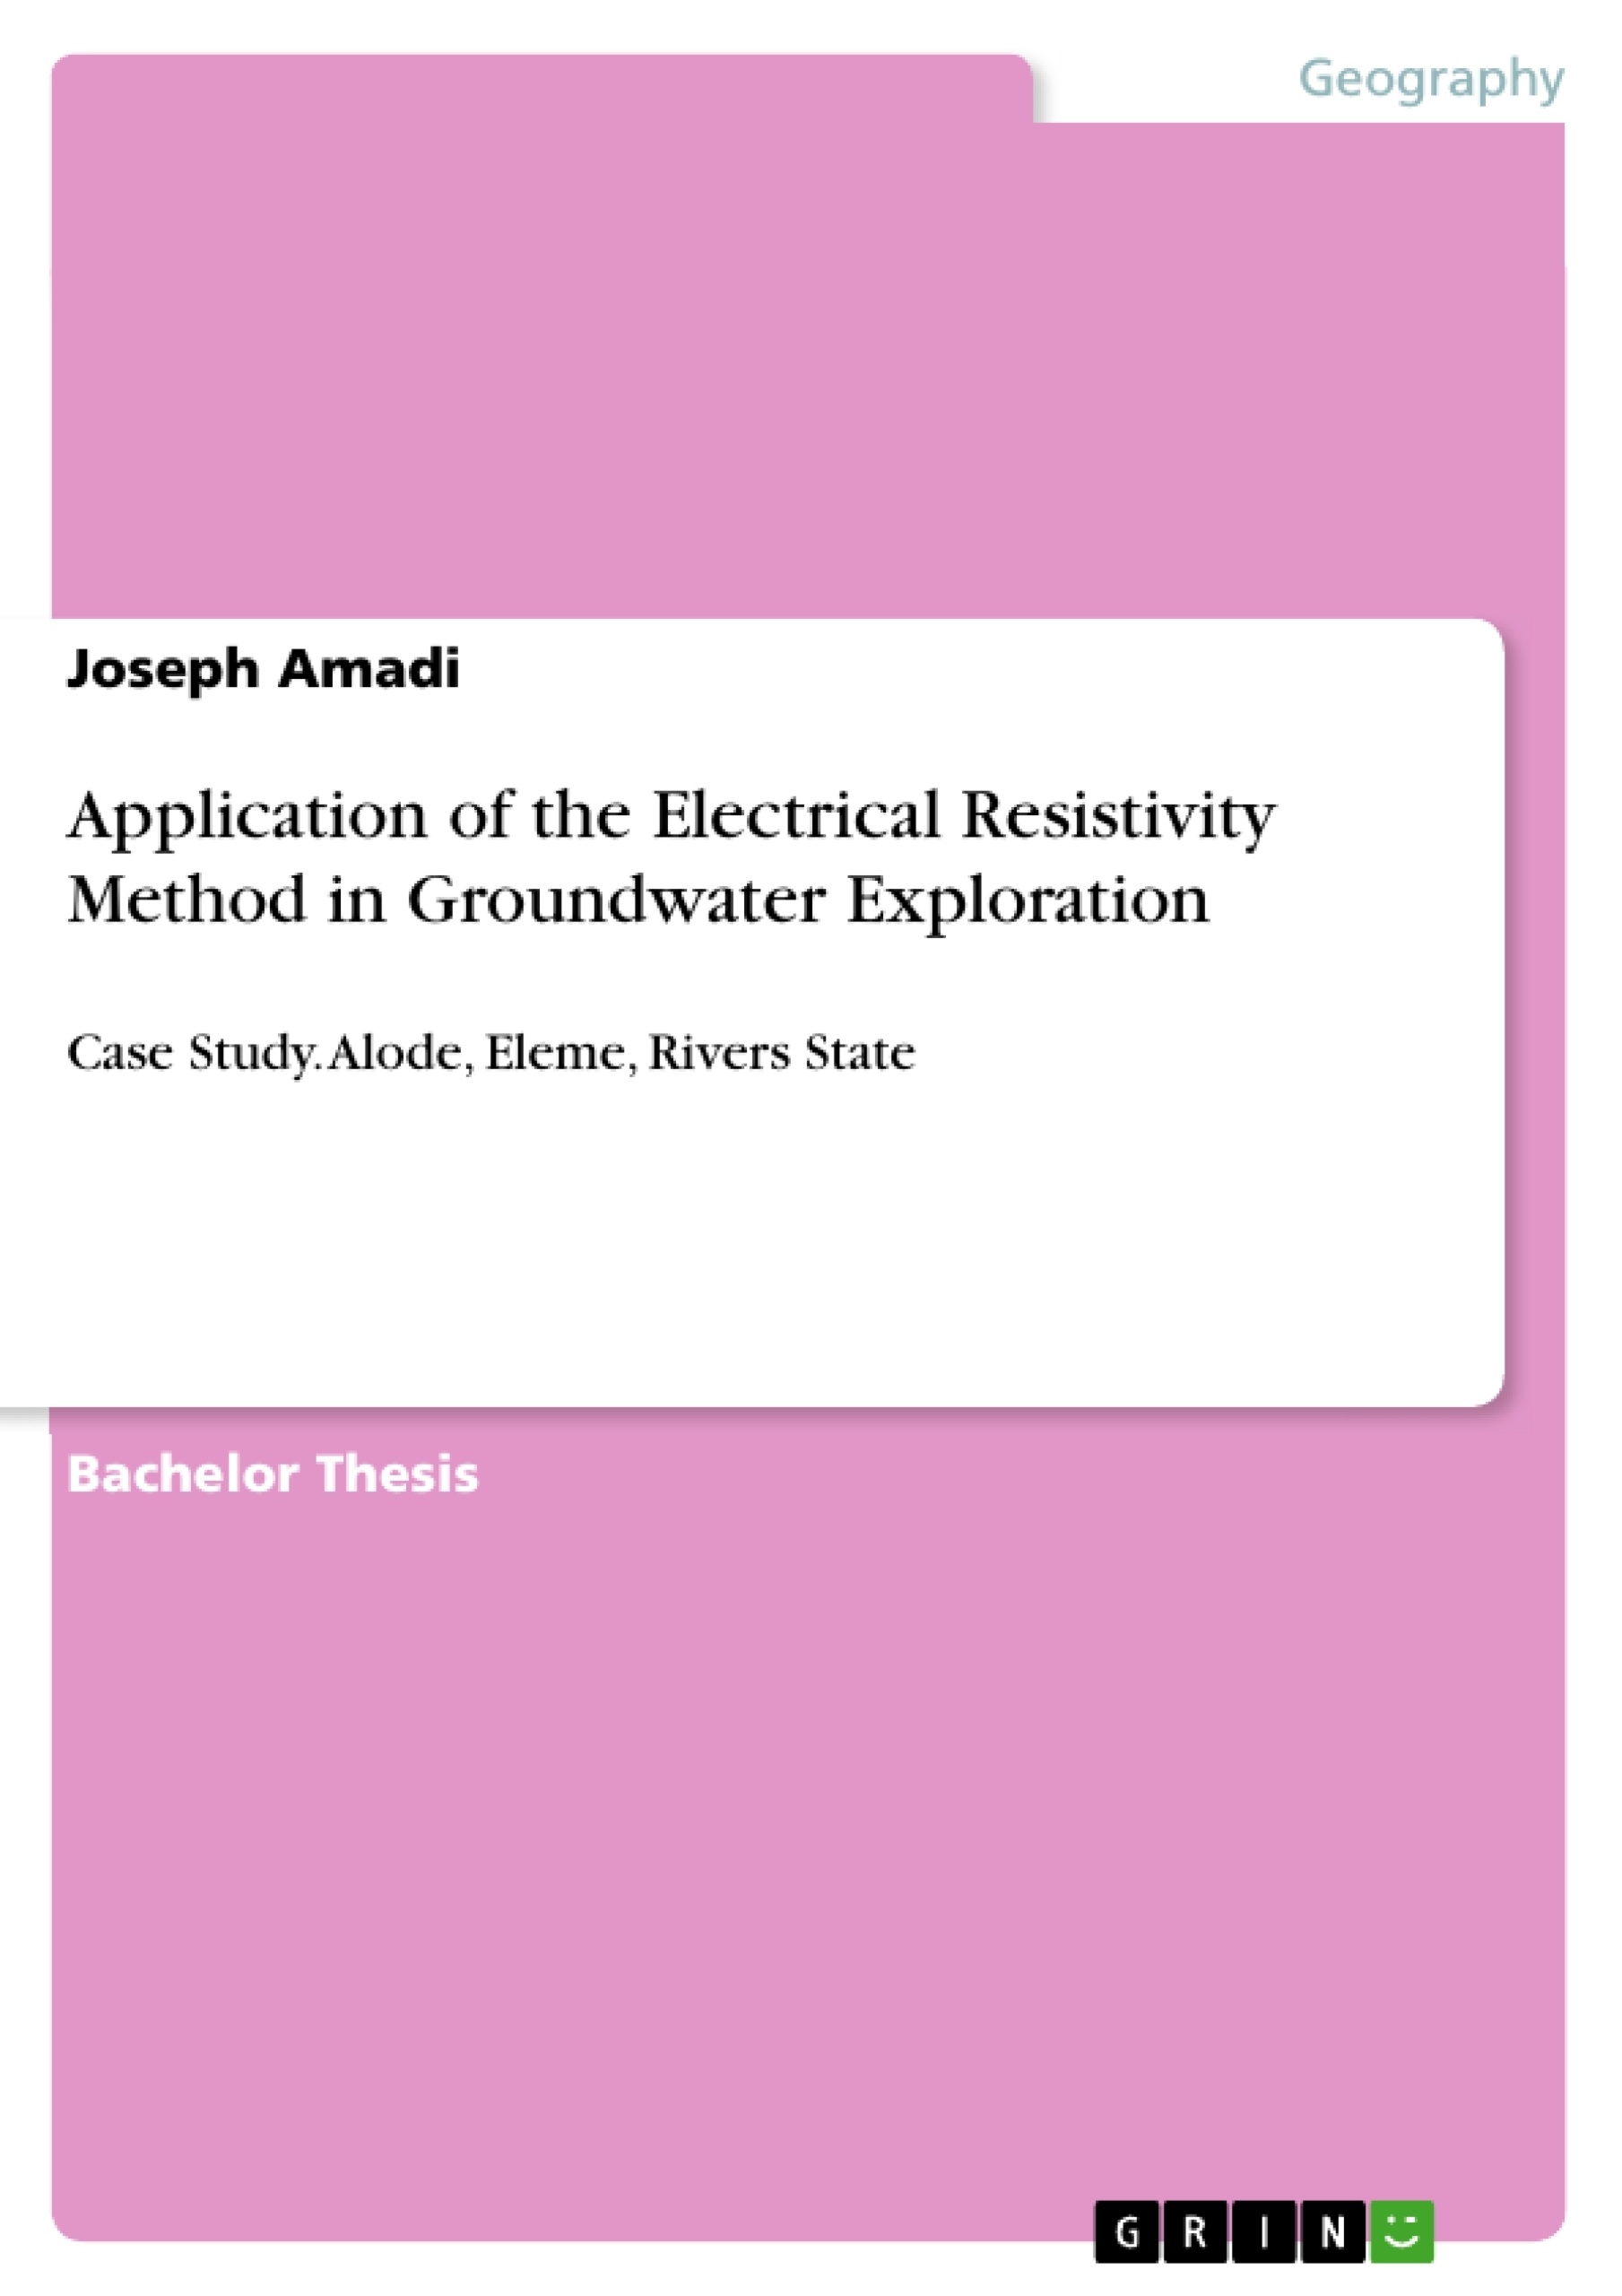 Titre: Application of the Electrical Resistivity Method in Groundwater Exploration